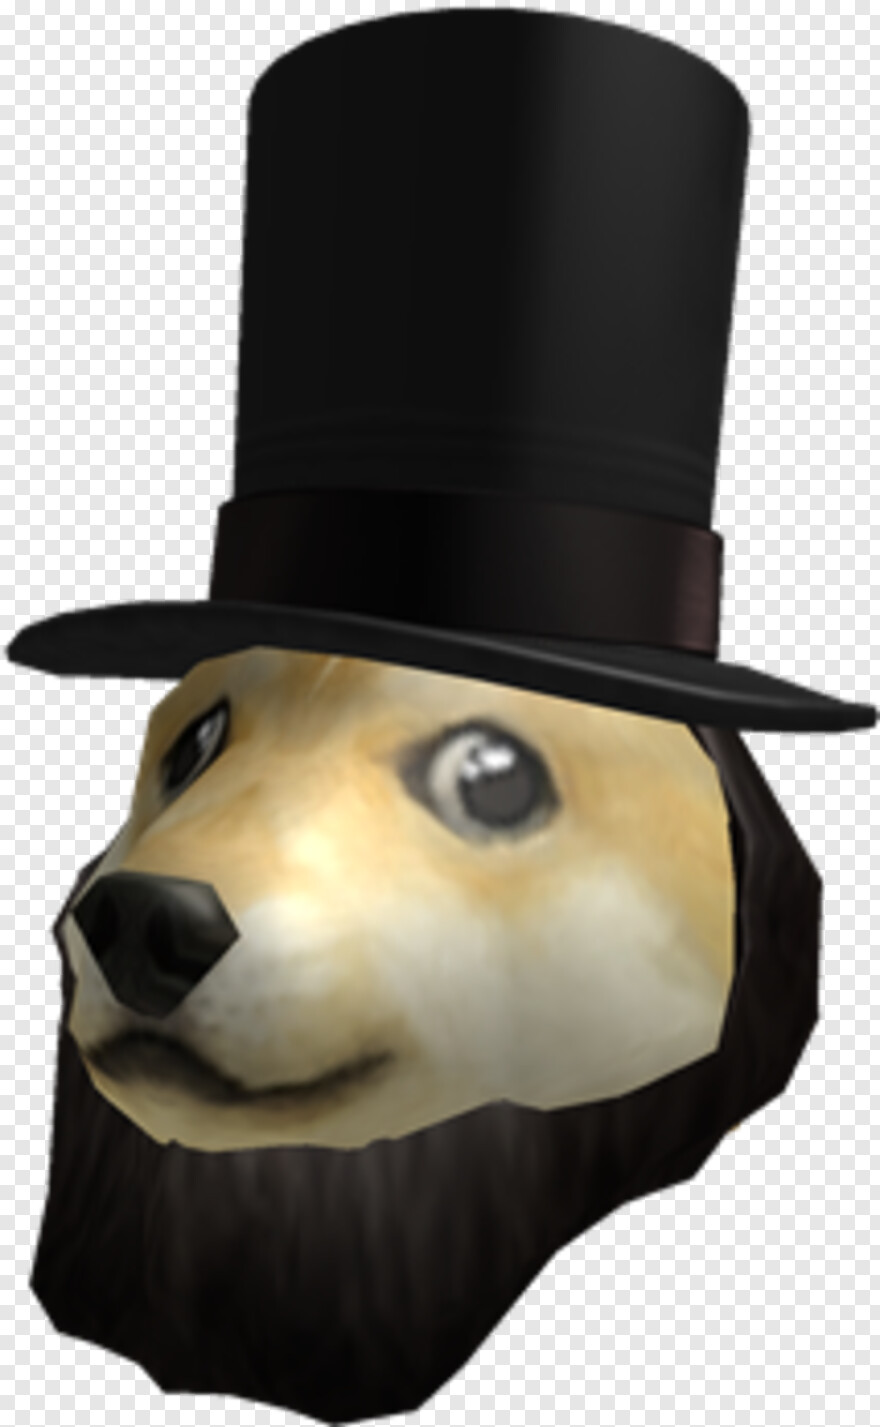 Doge Free Icon Library - doge body roblox